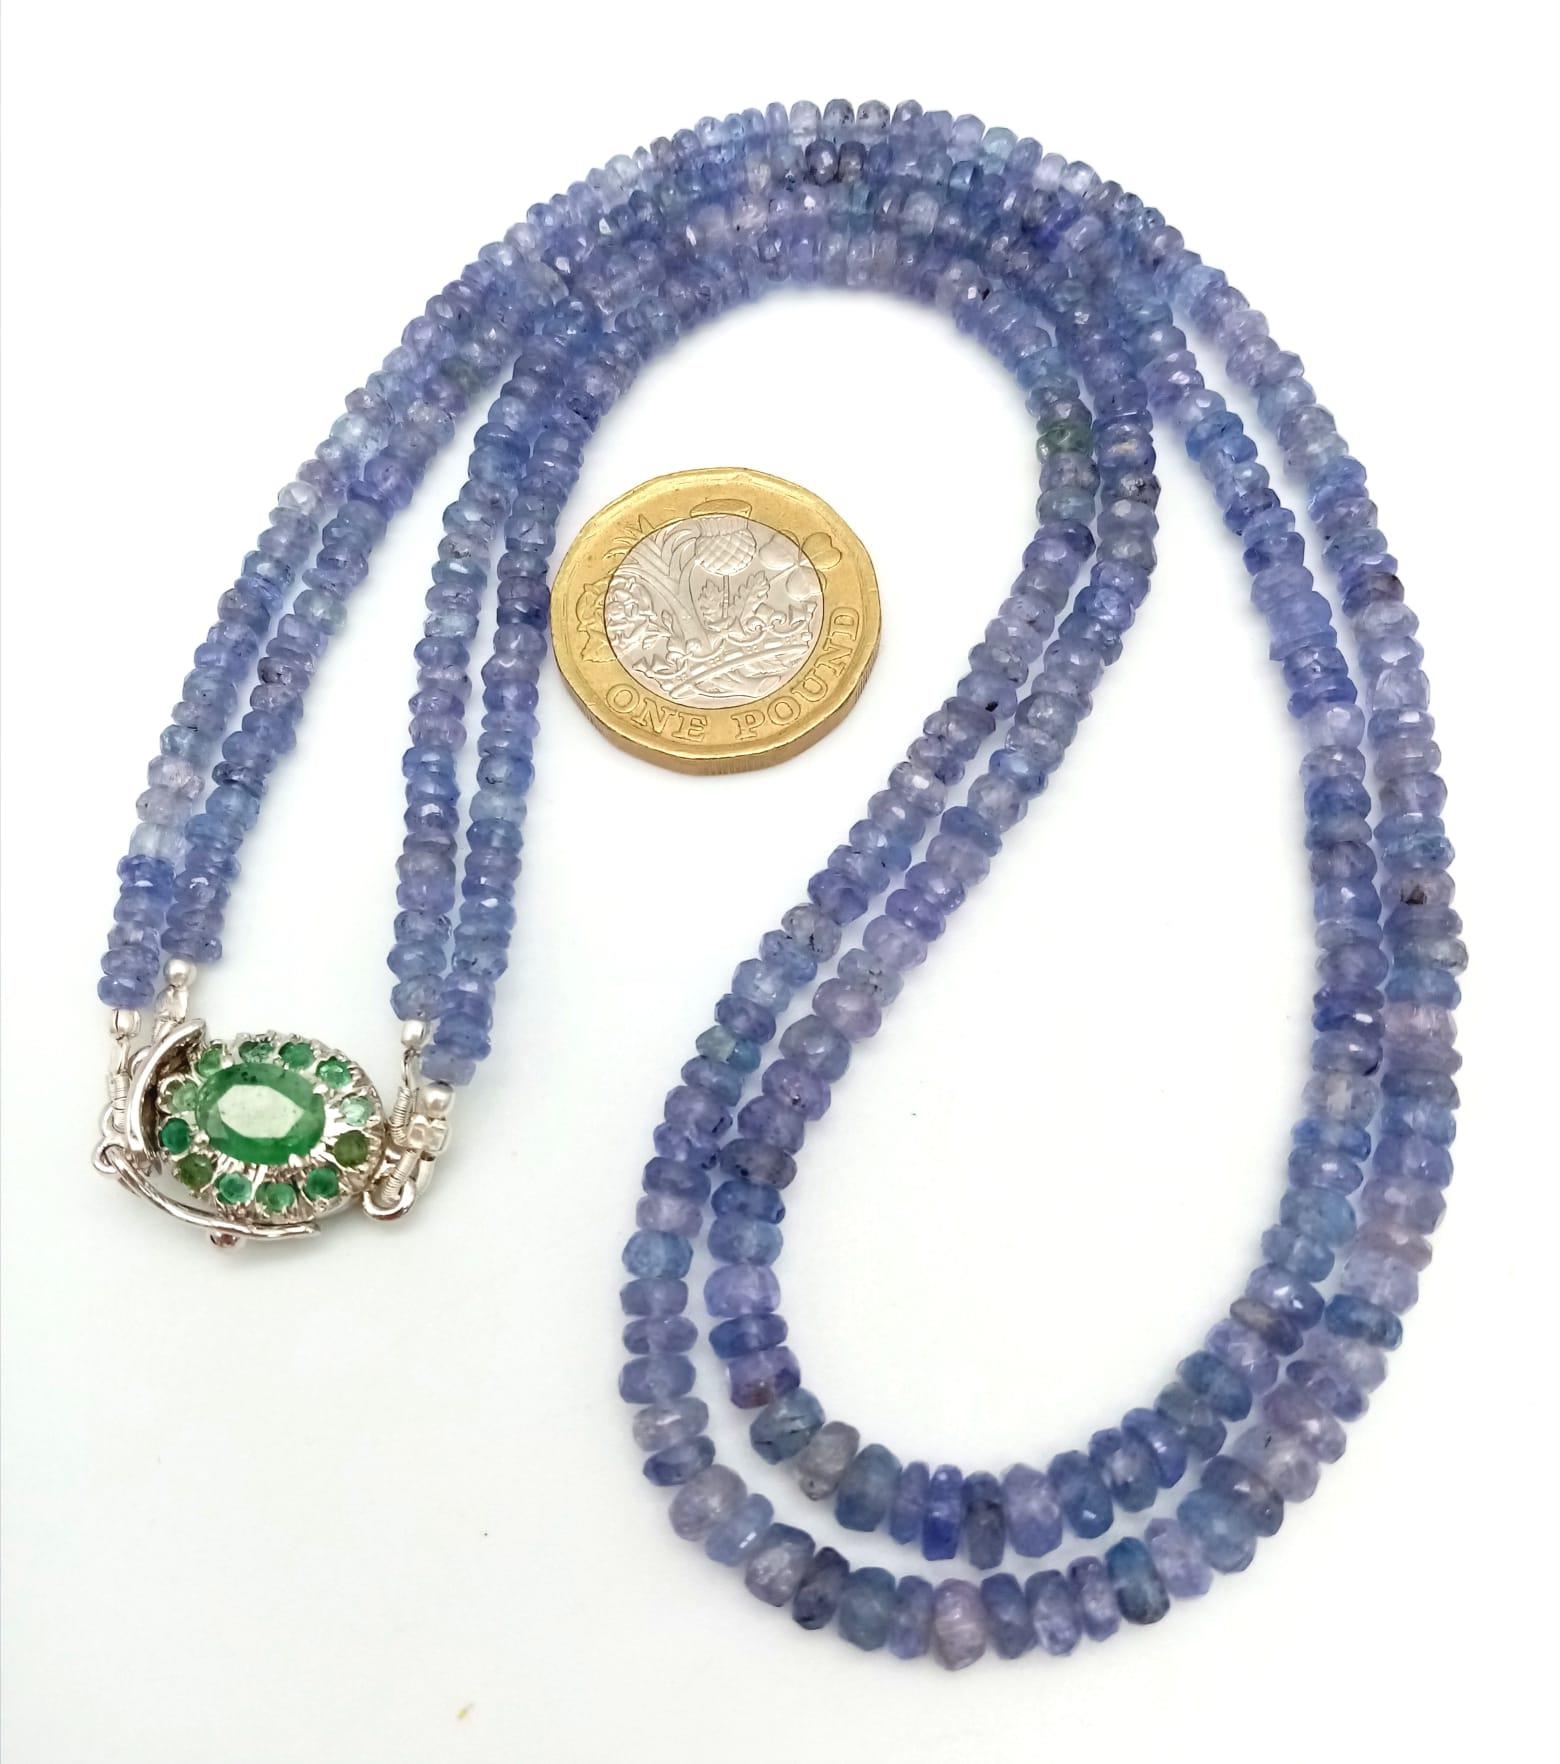 A Two Row Tanzanite Gemstone Necklace with an Emerald and 925 Silver Clasp. 45cm in length, 175ctw - Image 5 of 6